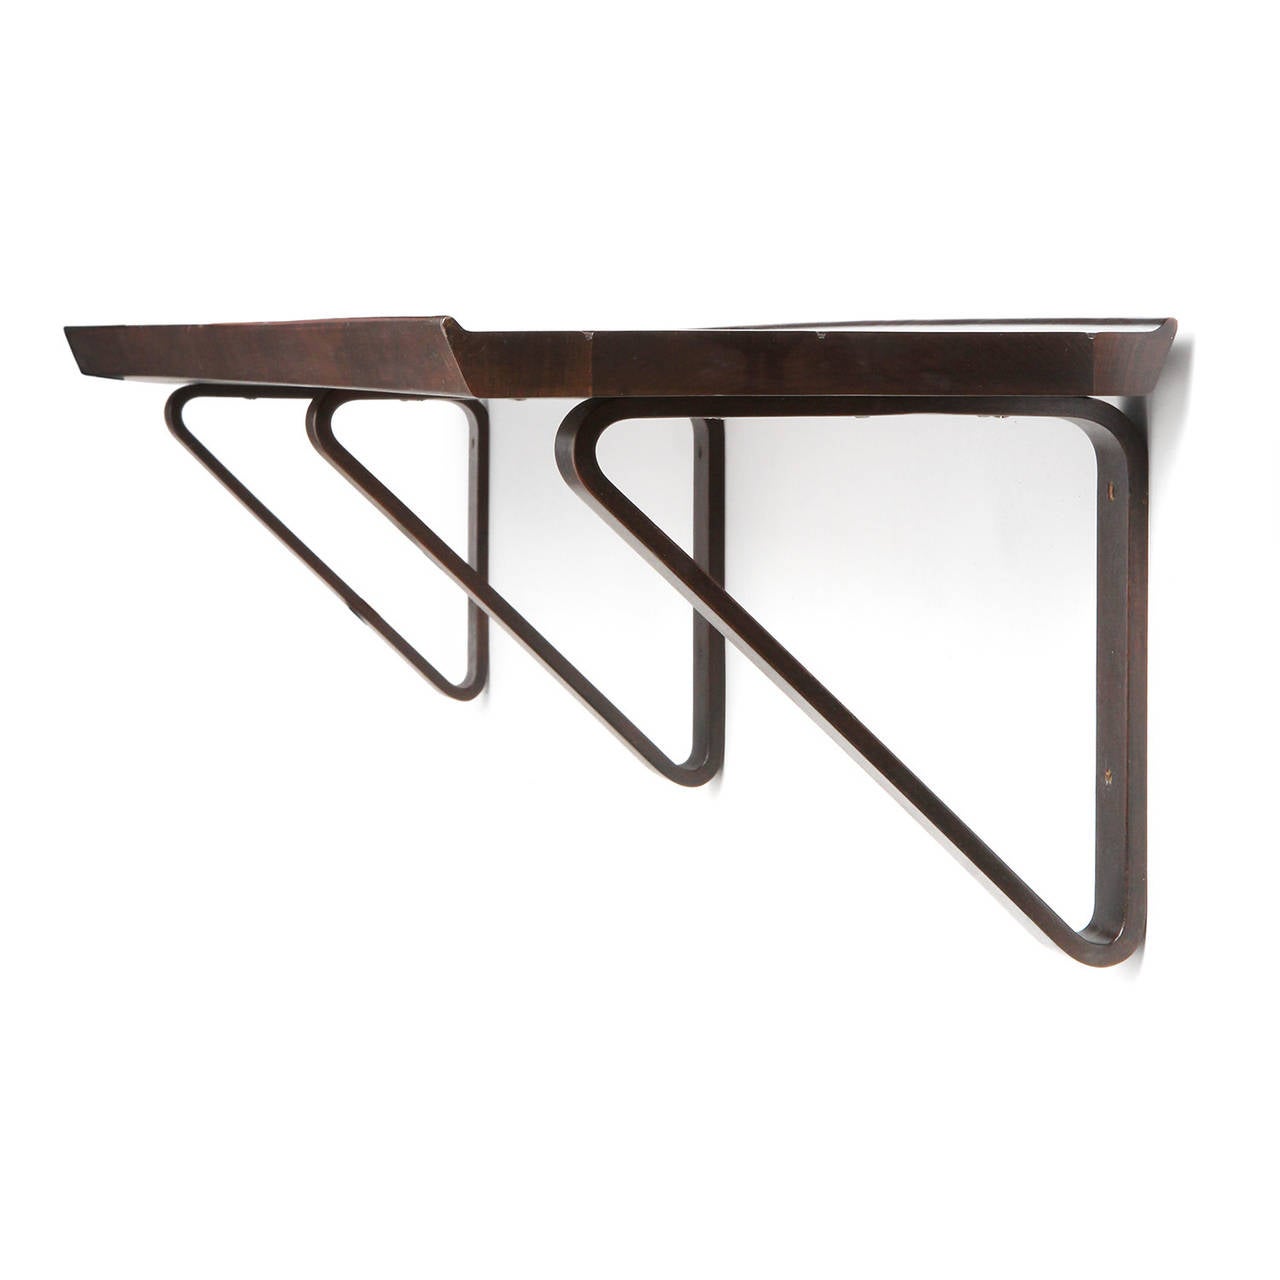 A finely crafted,  substantial and elegant wall shelf in rich walnut having three laminated continuous loop wood brackets supporting a slatted shelf with a beveled edge.